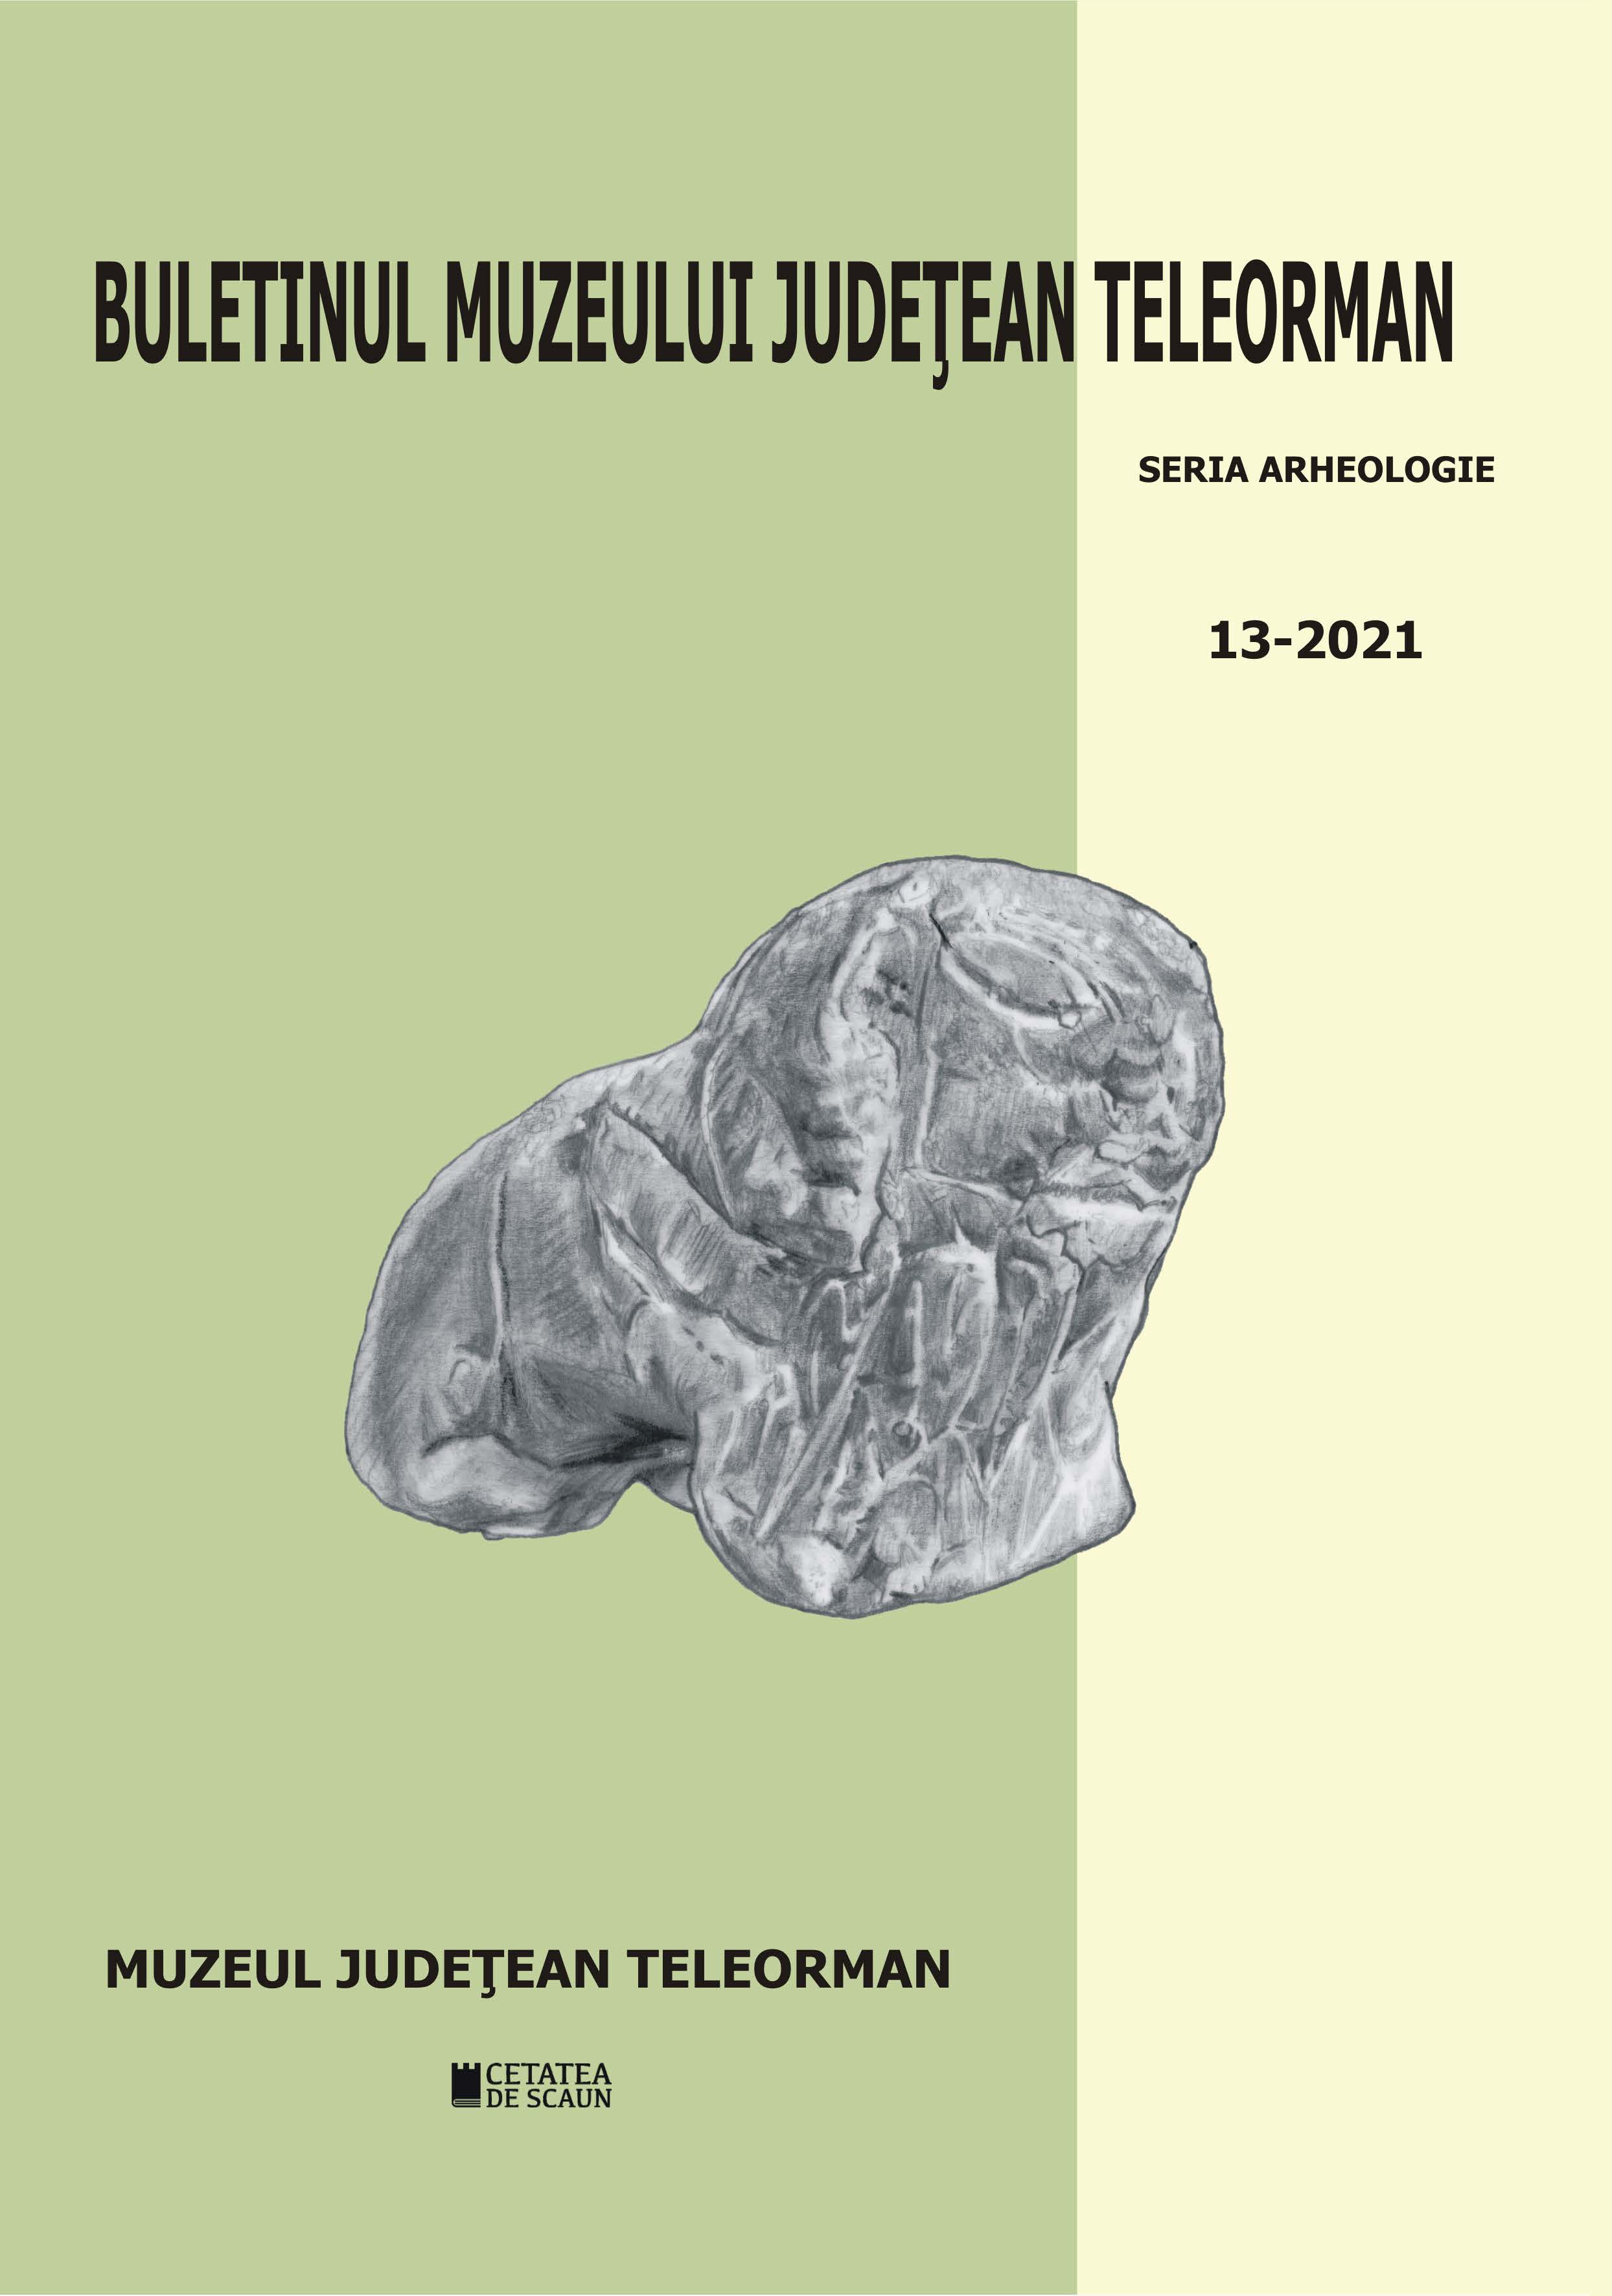 Two Thracian shaped fibula discovered in Prahova County Cover Image